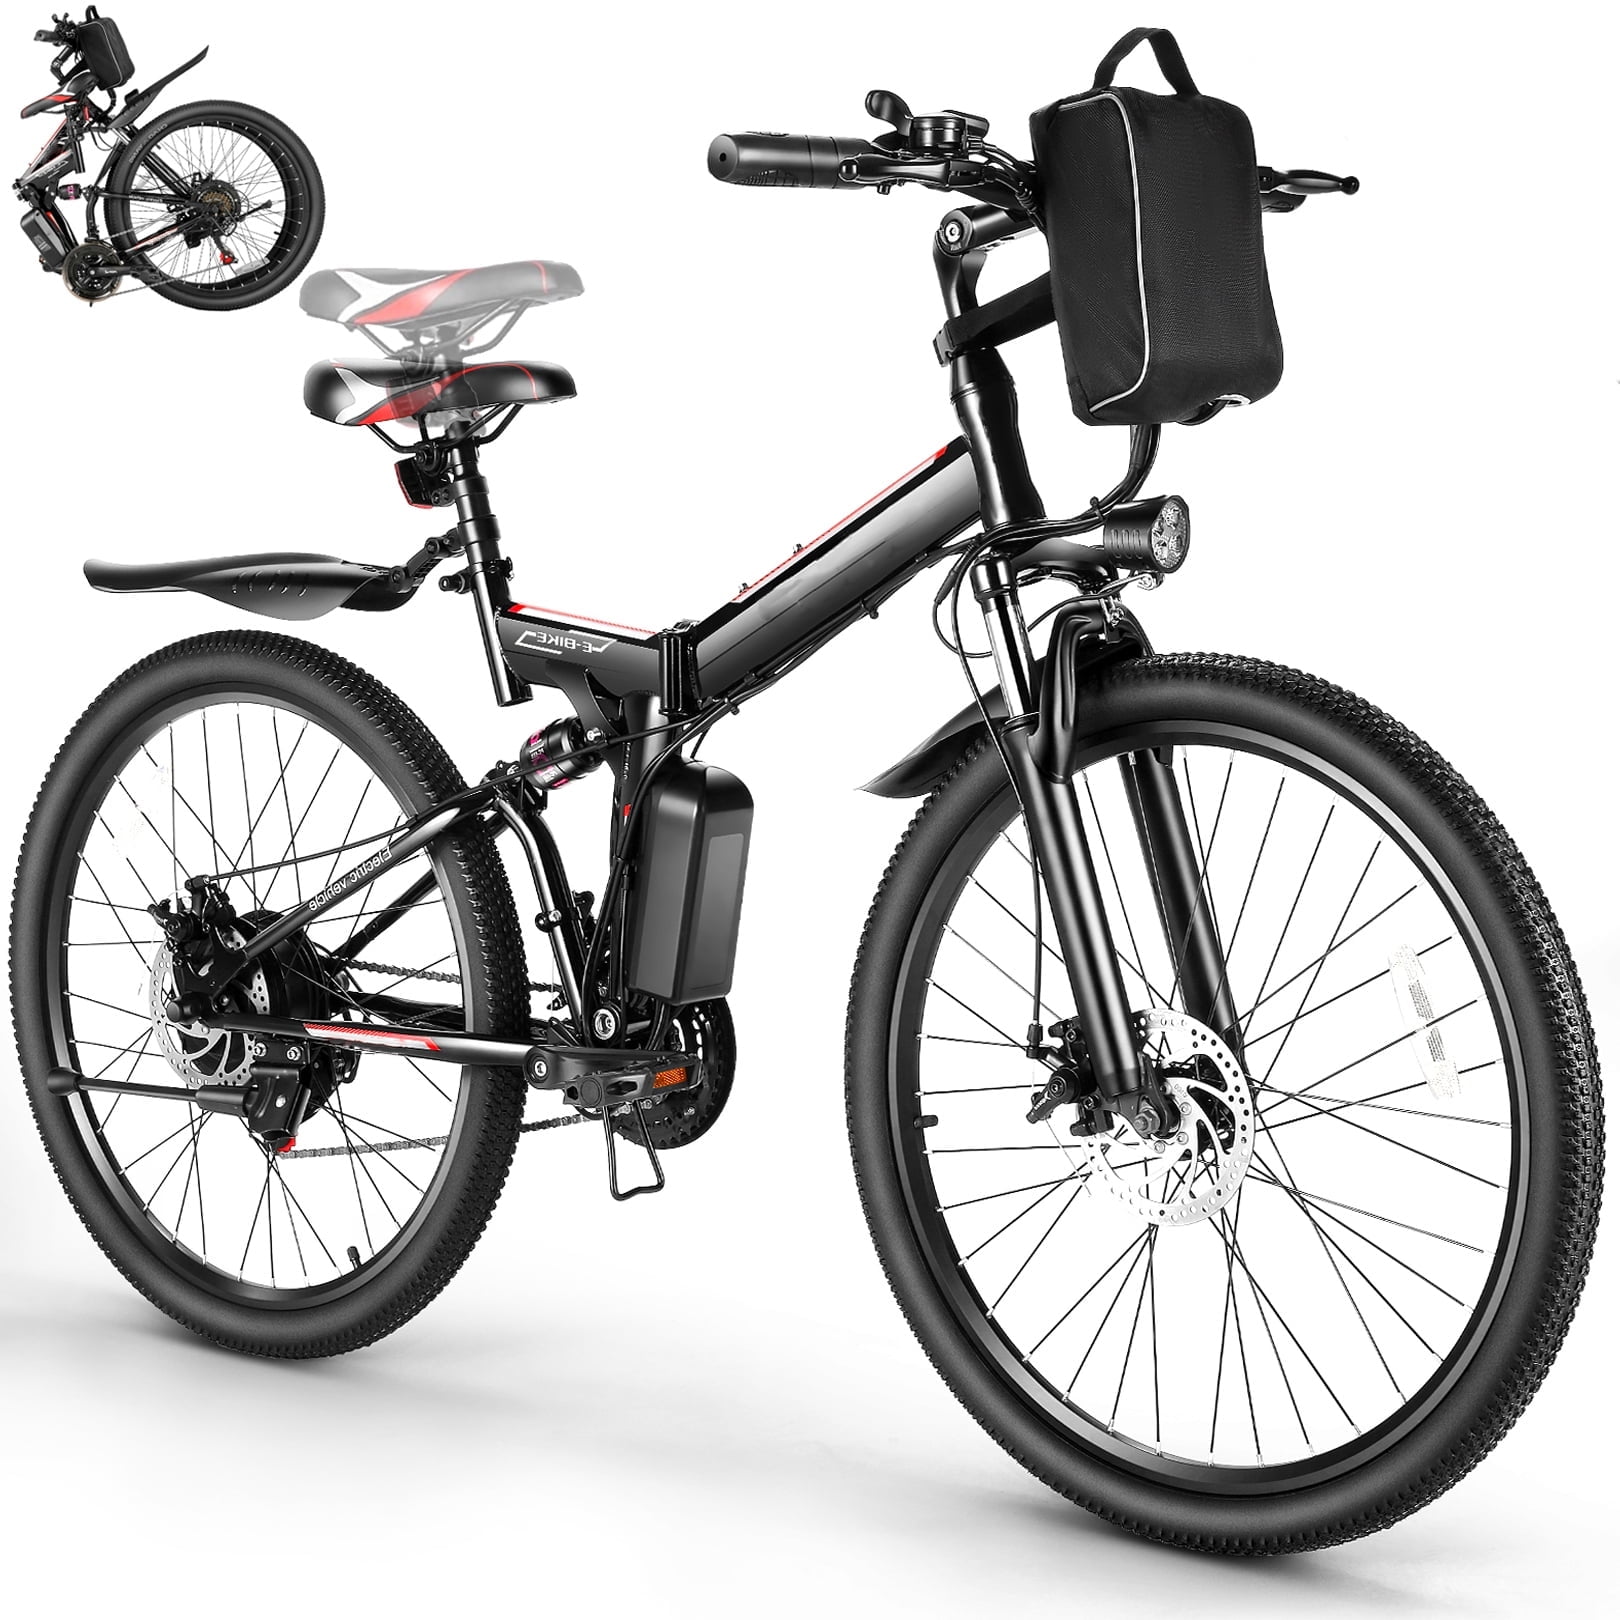 Gocio 500W 26″ 21 Speed Adult Electric Foldable bike with 48V Battery, Full Suspensio